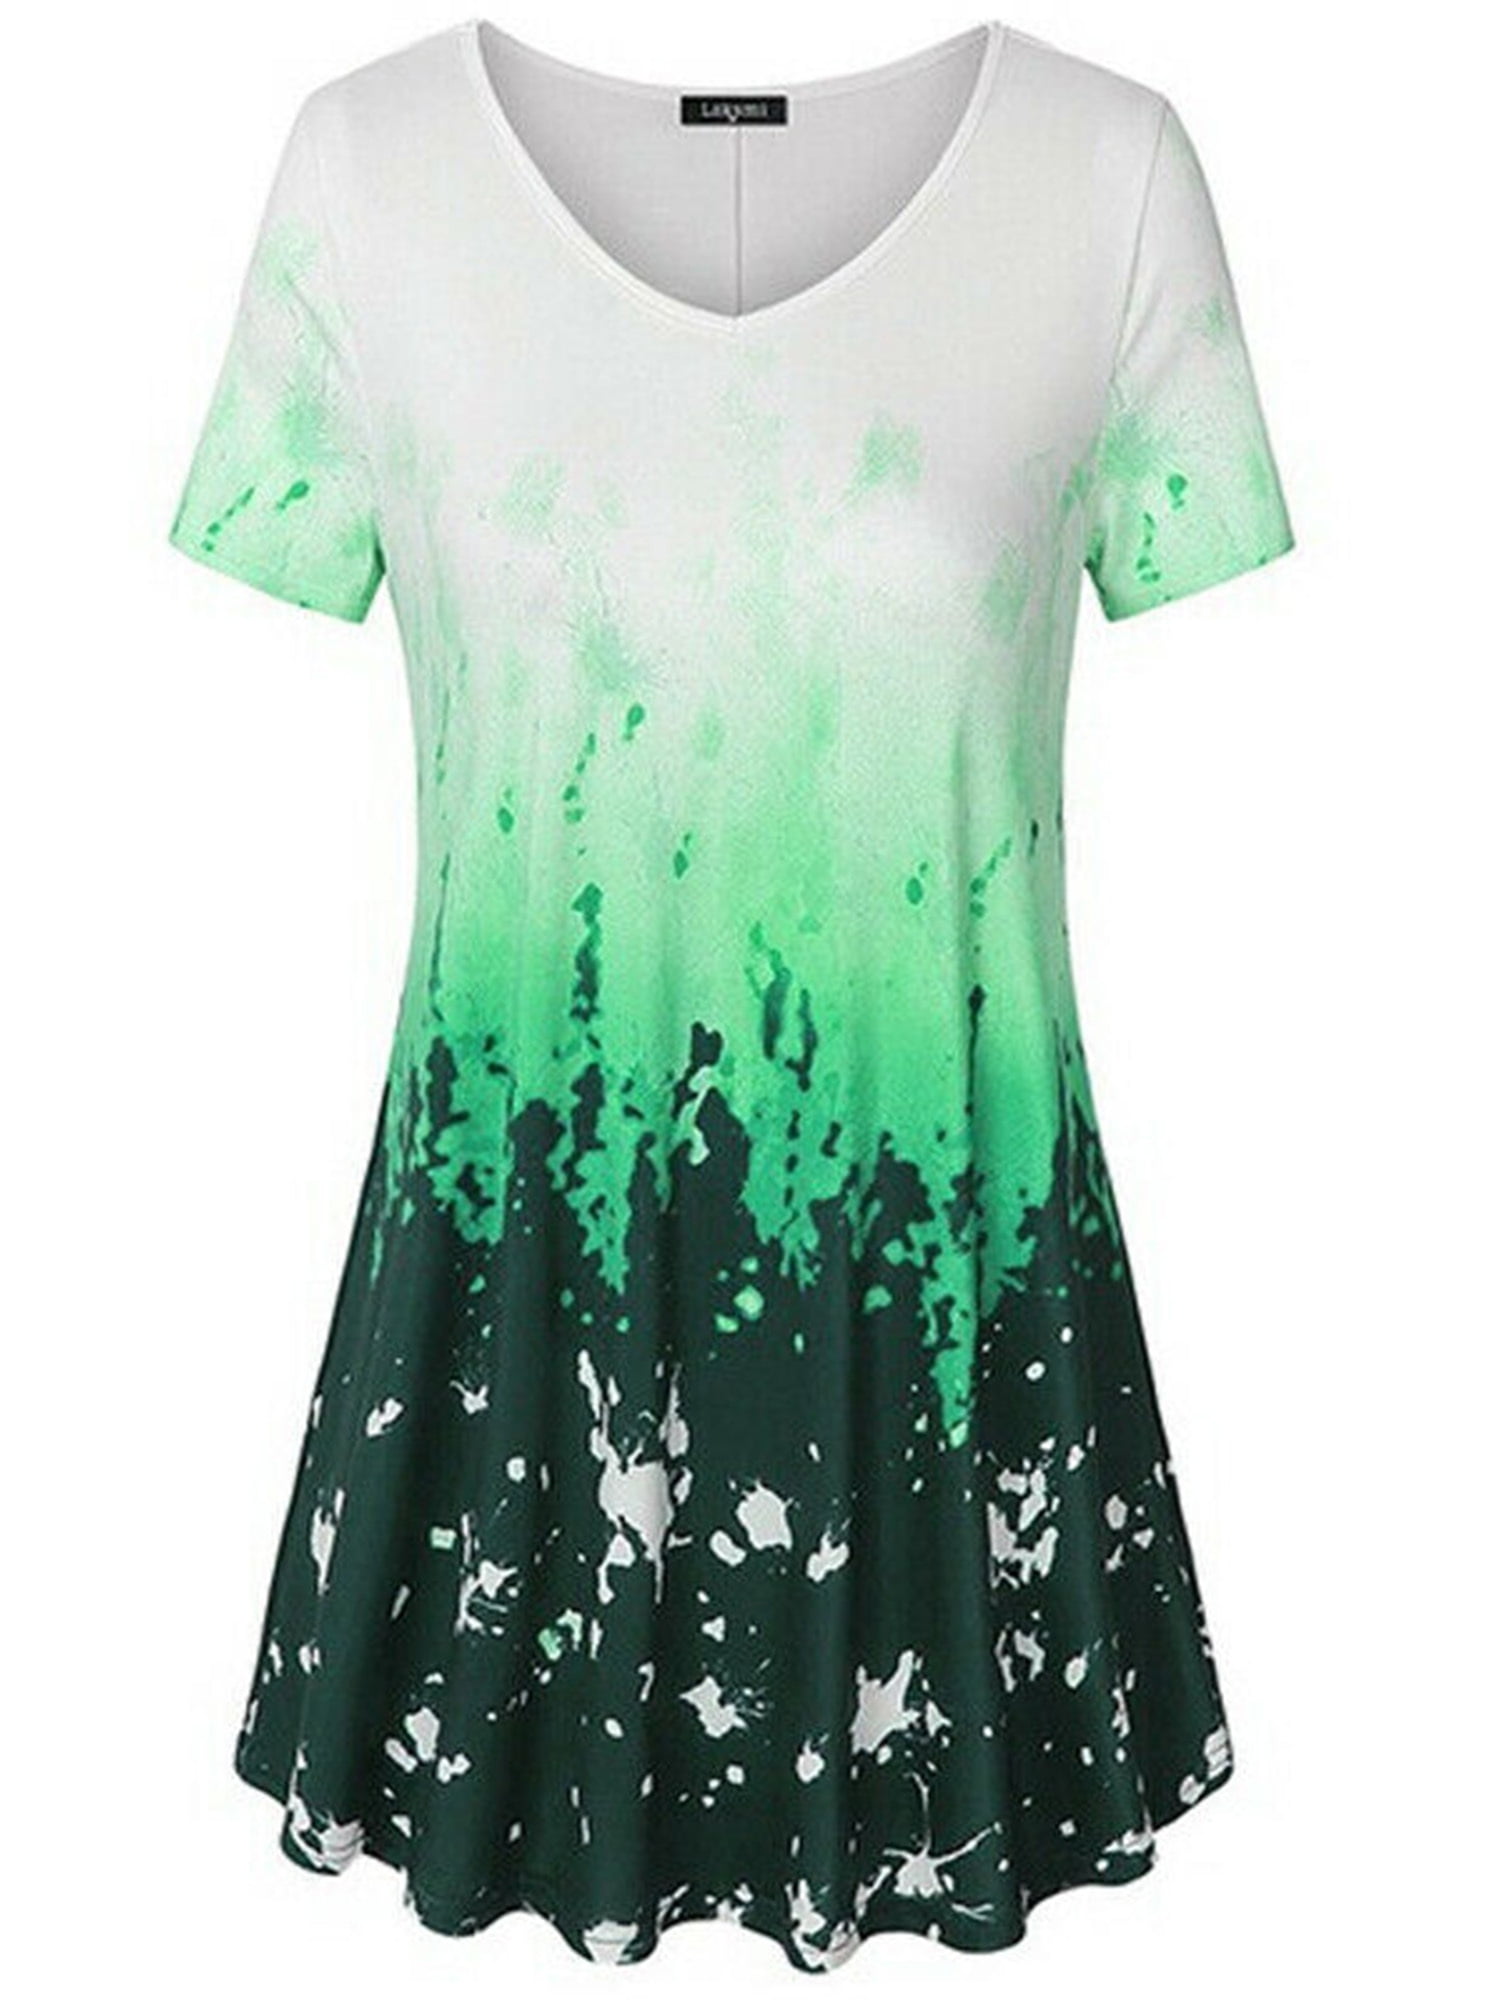 Women's Plus Size Gradient Tunic Tops Short Sleeve Casual T Shirt Loose Blouse